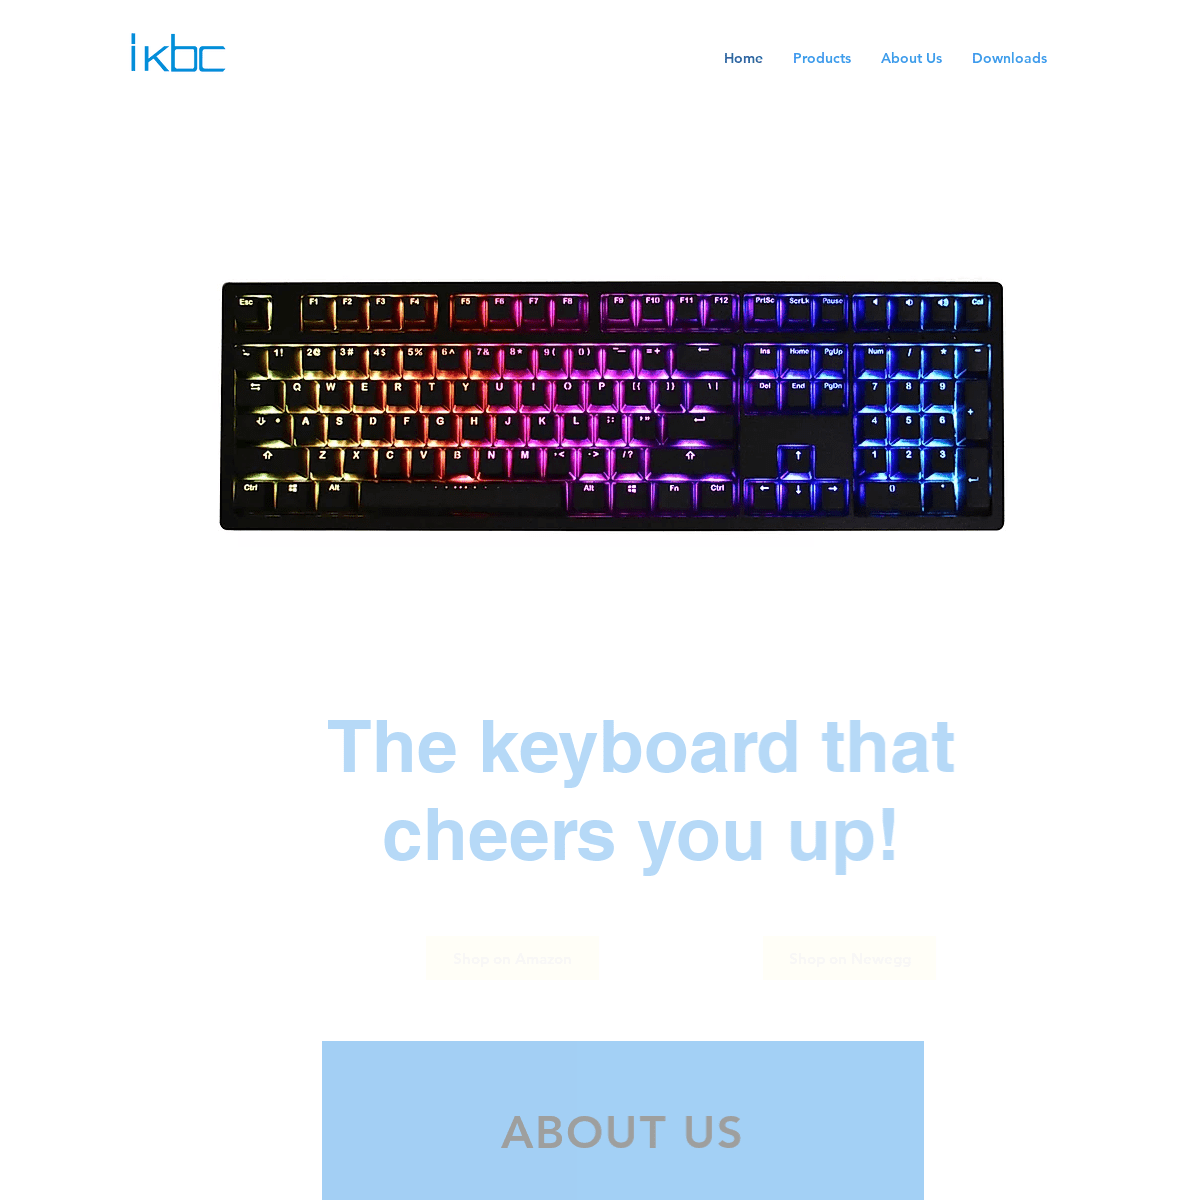 A complete backup of ikbckeyboard.com